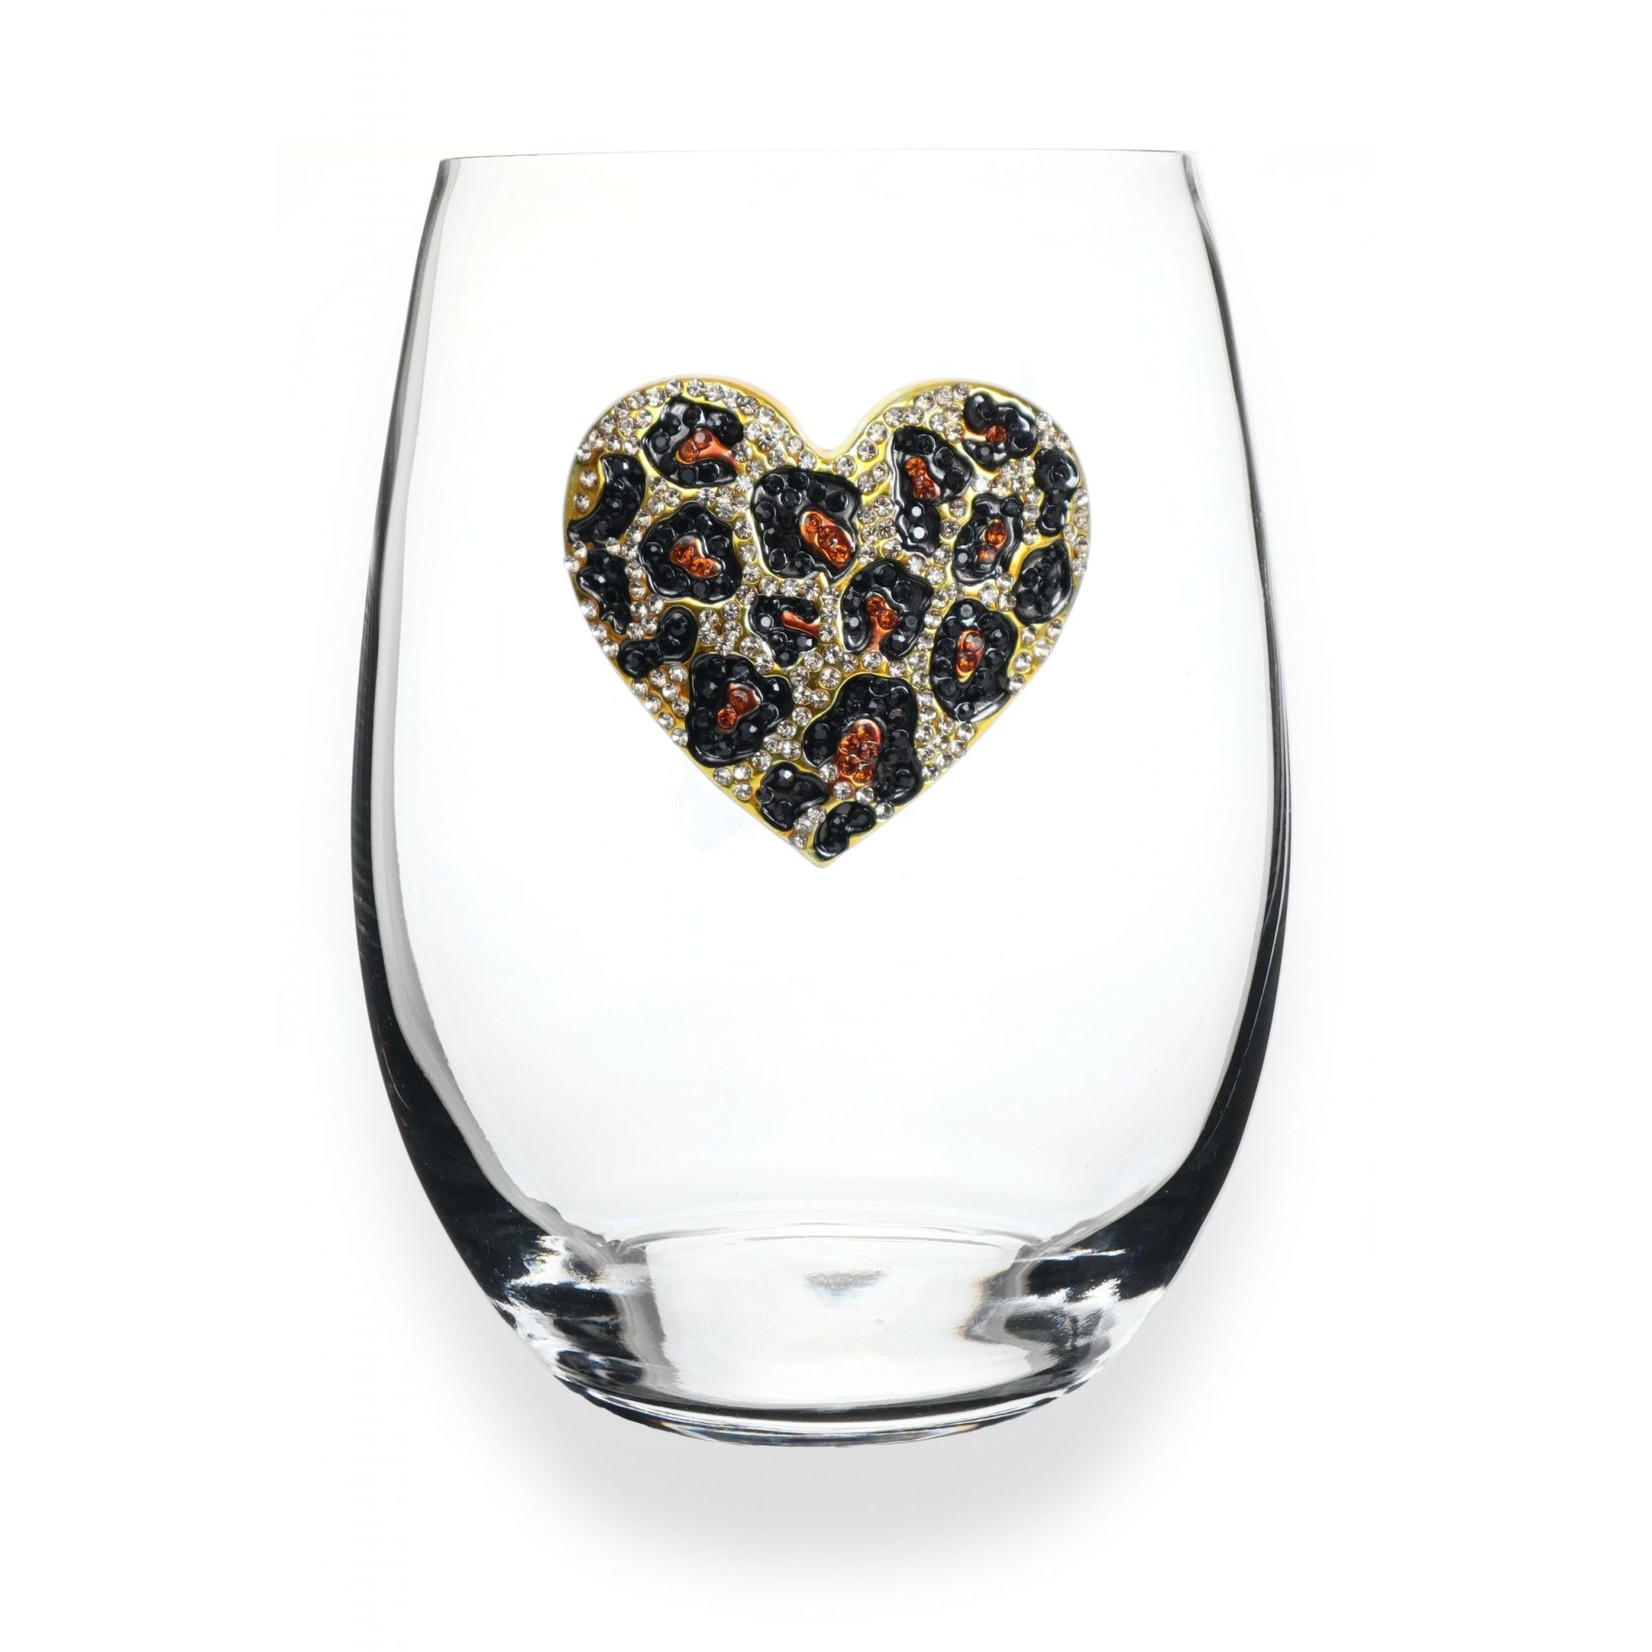 The Queen's Jewels Leopard Heart Stemless Wine Glass